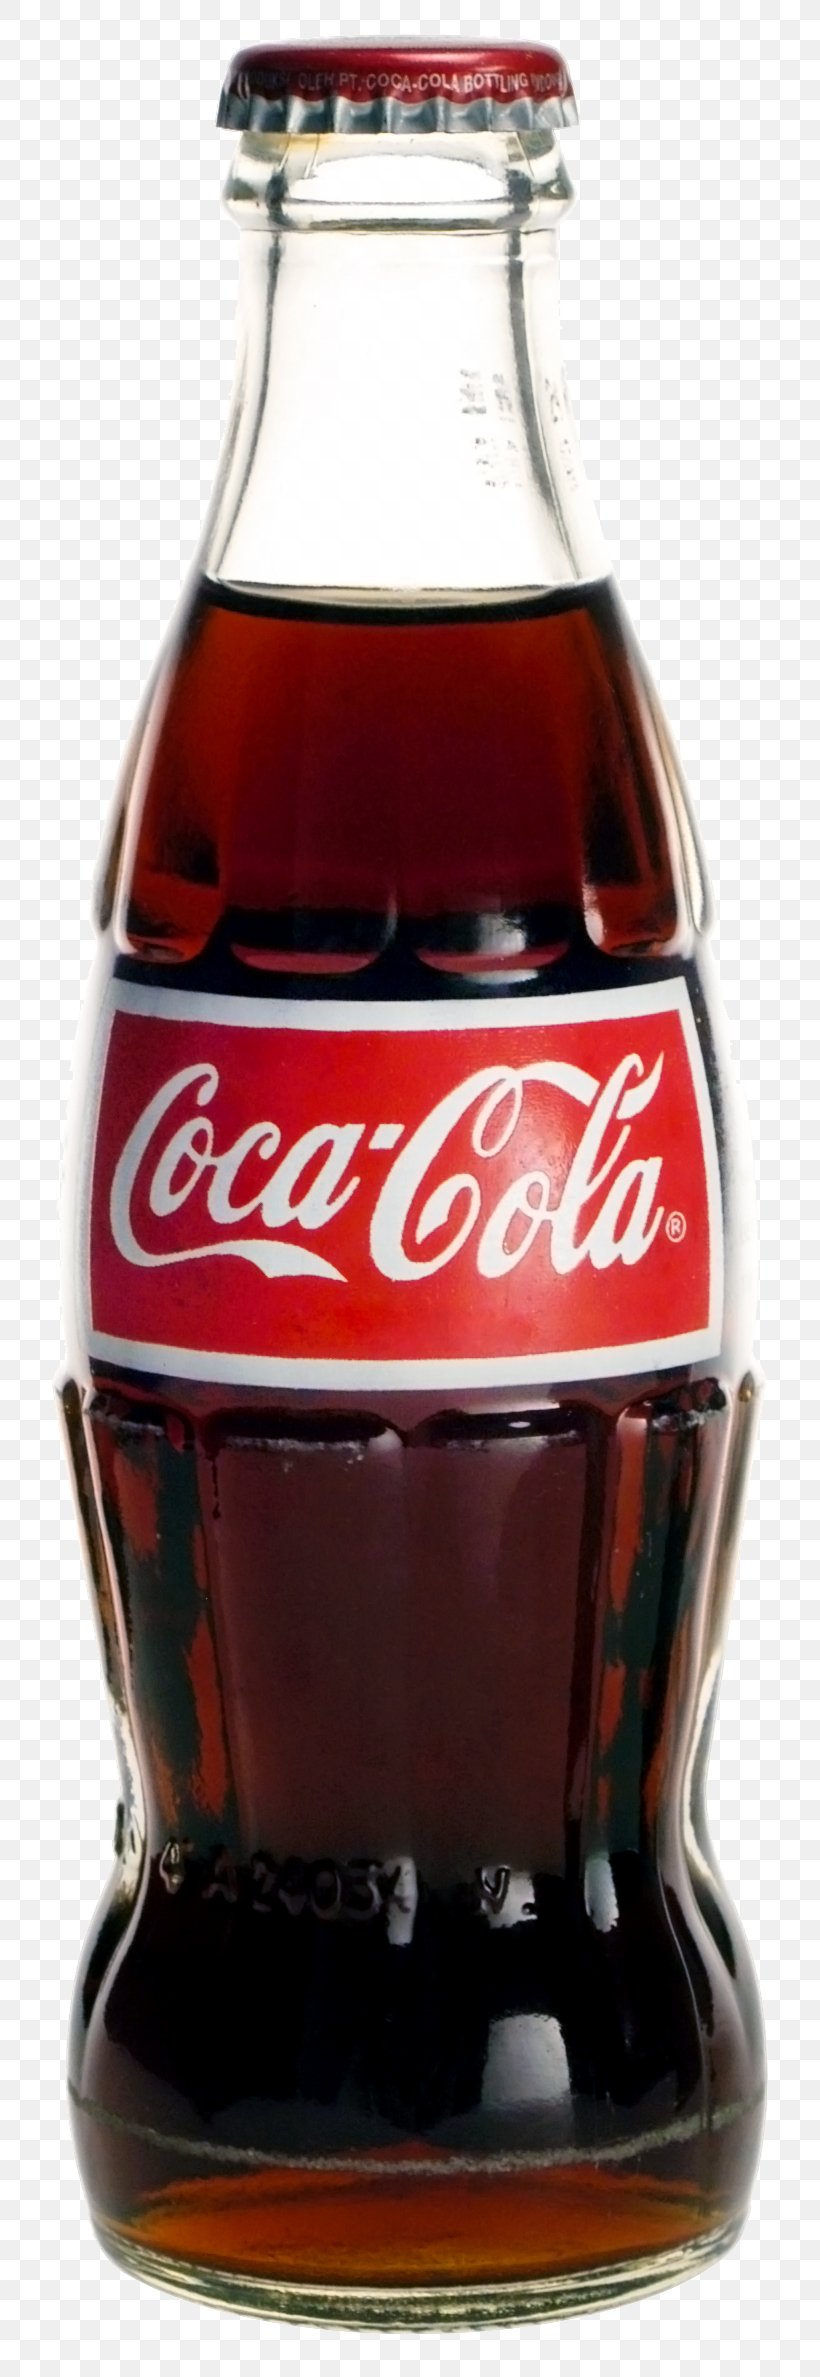 The Coca-Cola Company Fizzy Drinks Bottle, PNG, 784x2377px, Cocacola, Alcoholic Drink, Beverage Can, Bottle, Bottling Company Download Free